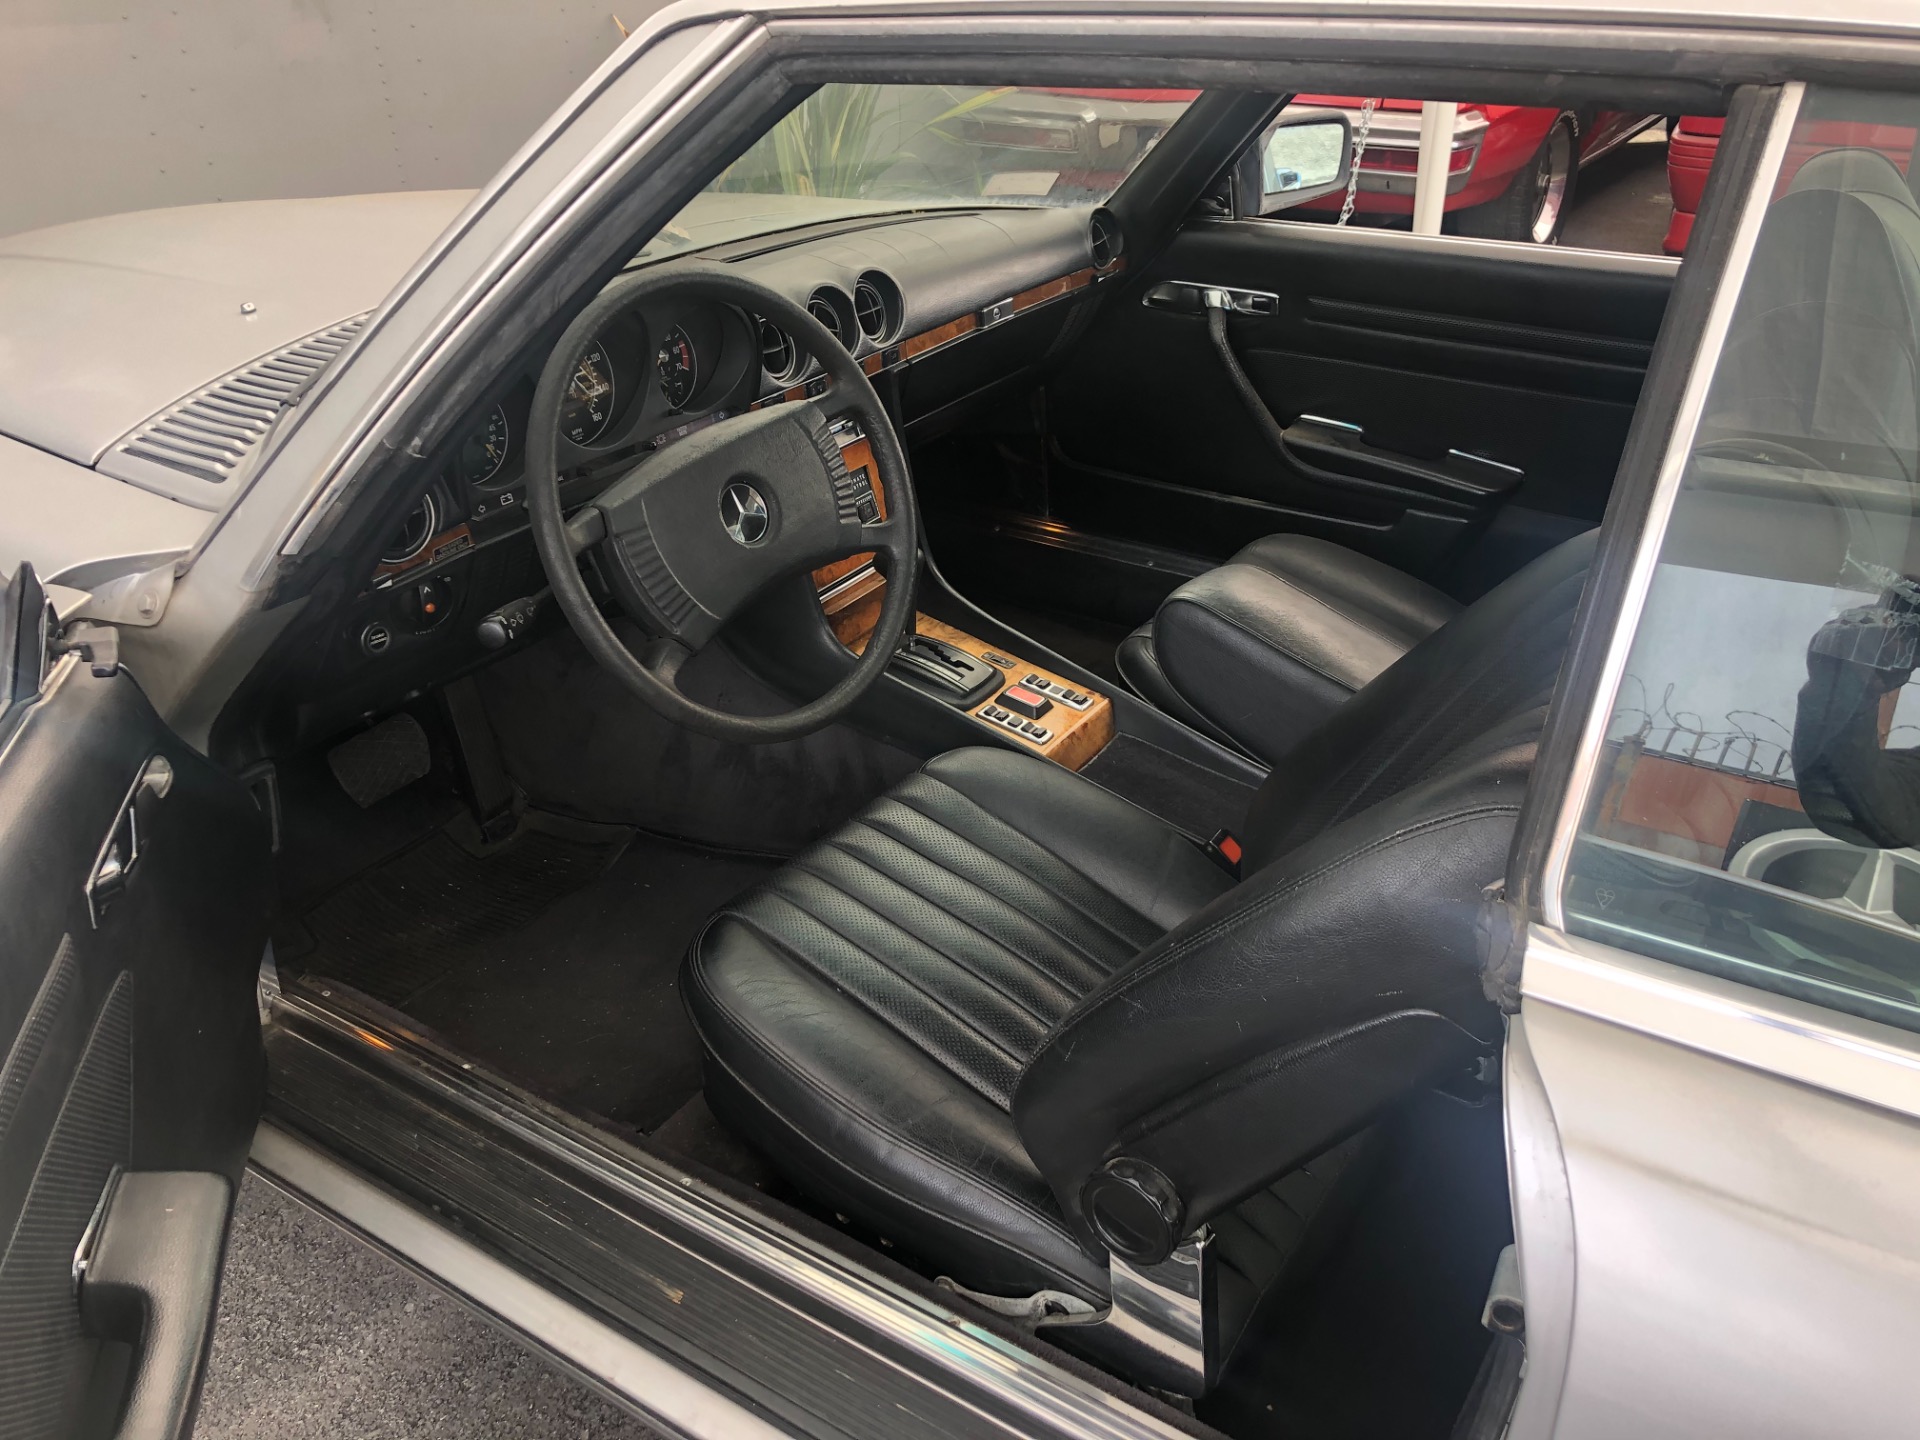 Used 1978 Mercedes Benz 450 Class 450 SLC